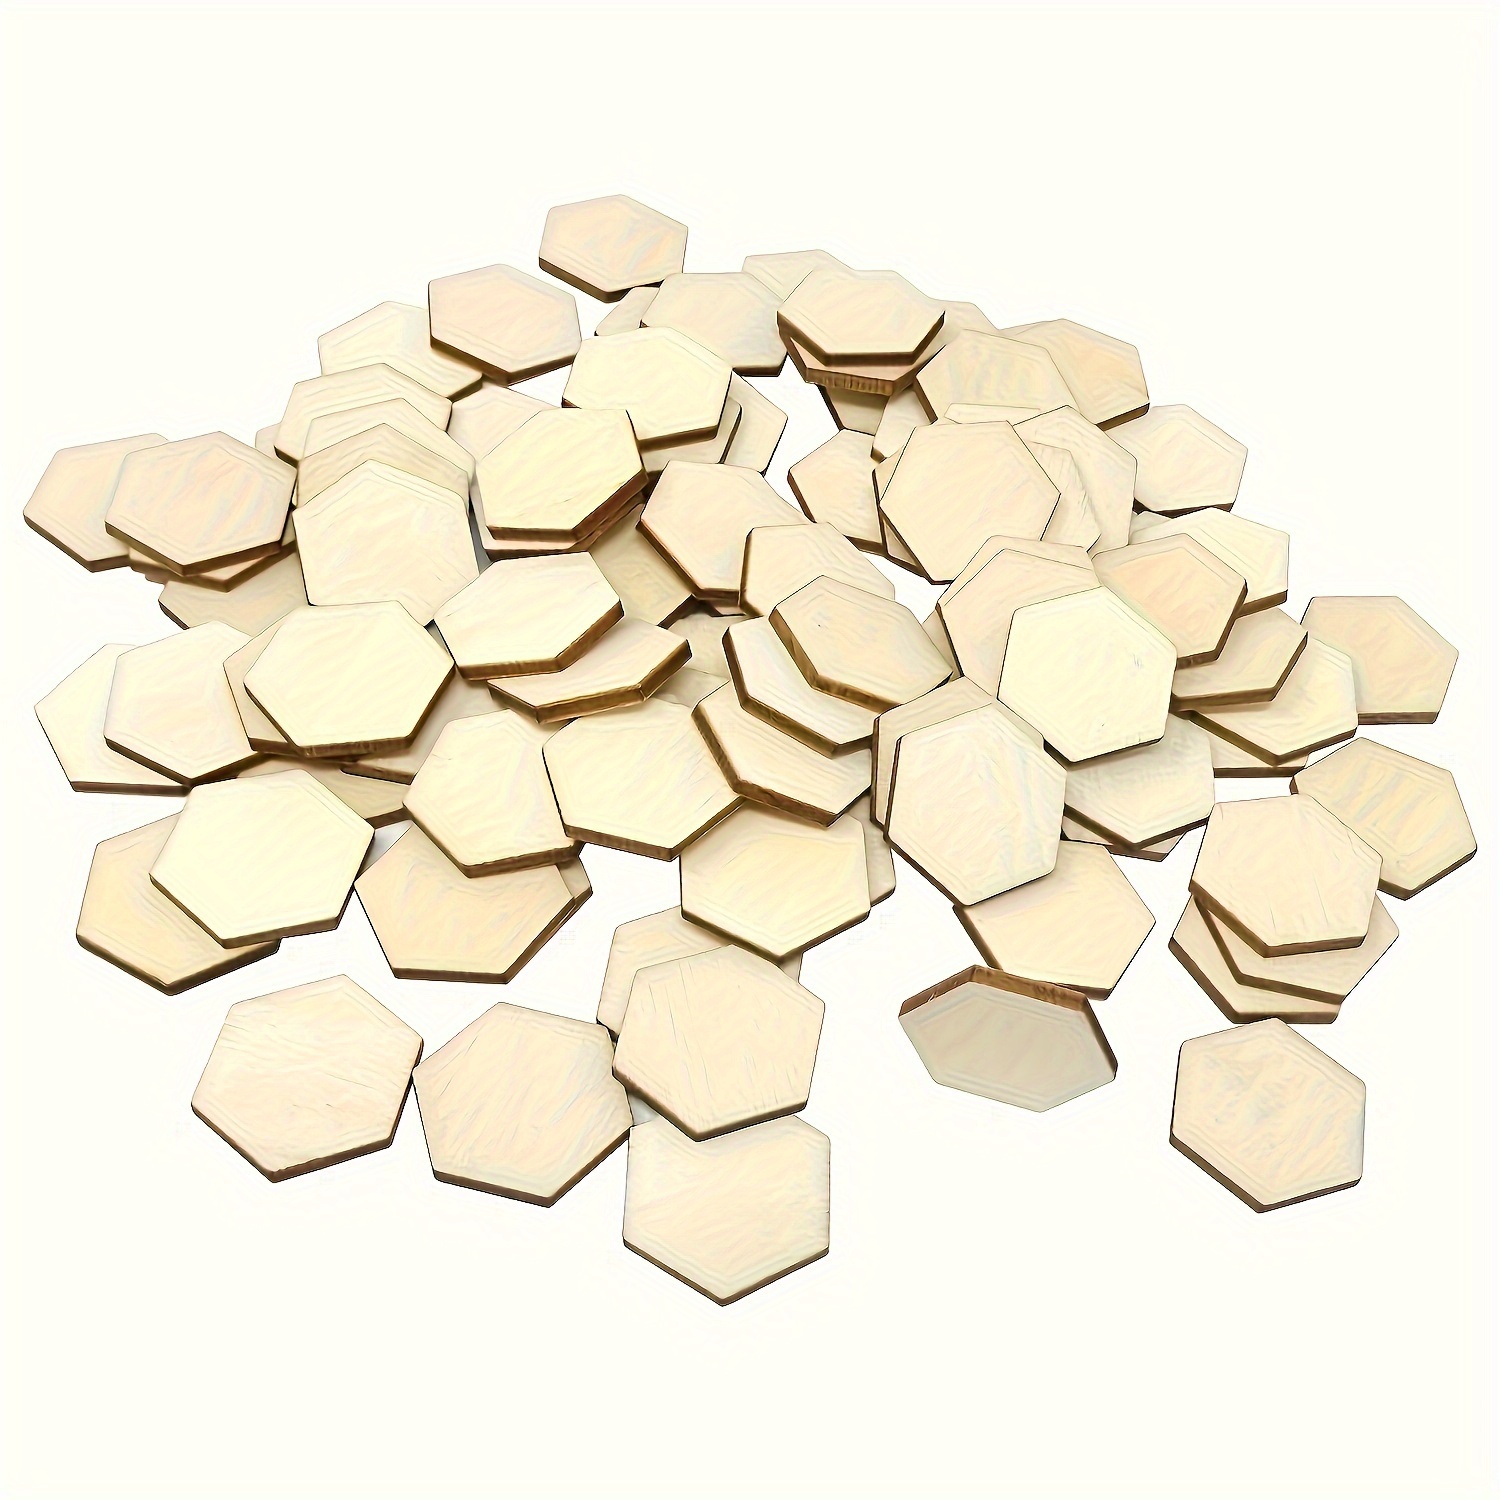 

100pcs 25 Mm/1.18 Inch Hexagonal Blank Wood Pieces Wooden Pieces Decorations For Diy Crafts, Patio, Home Decoration